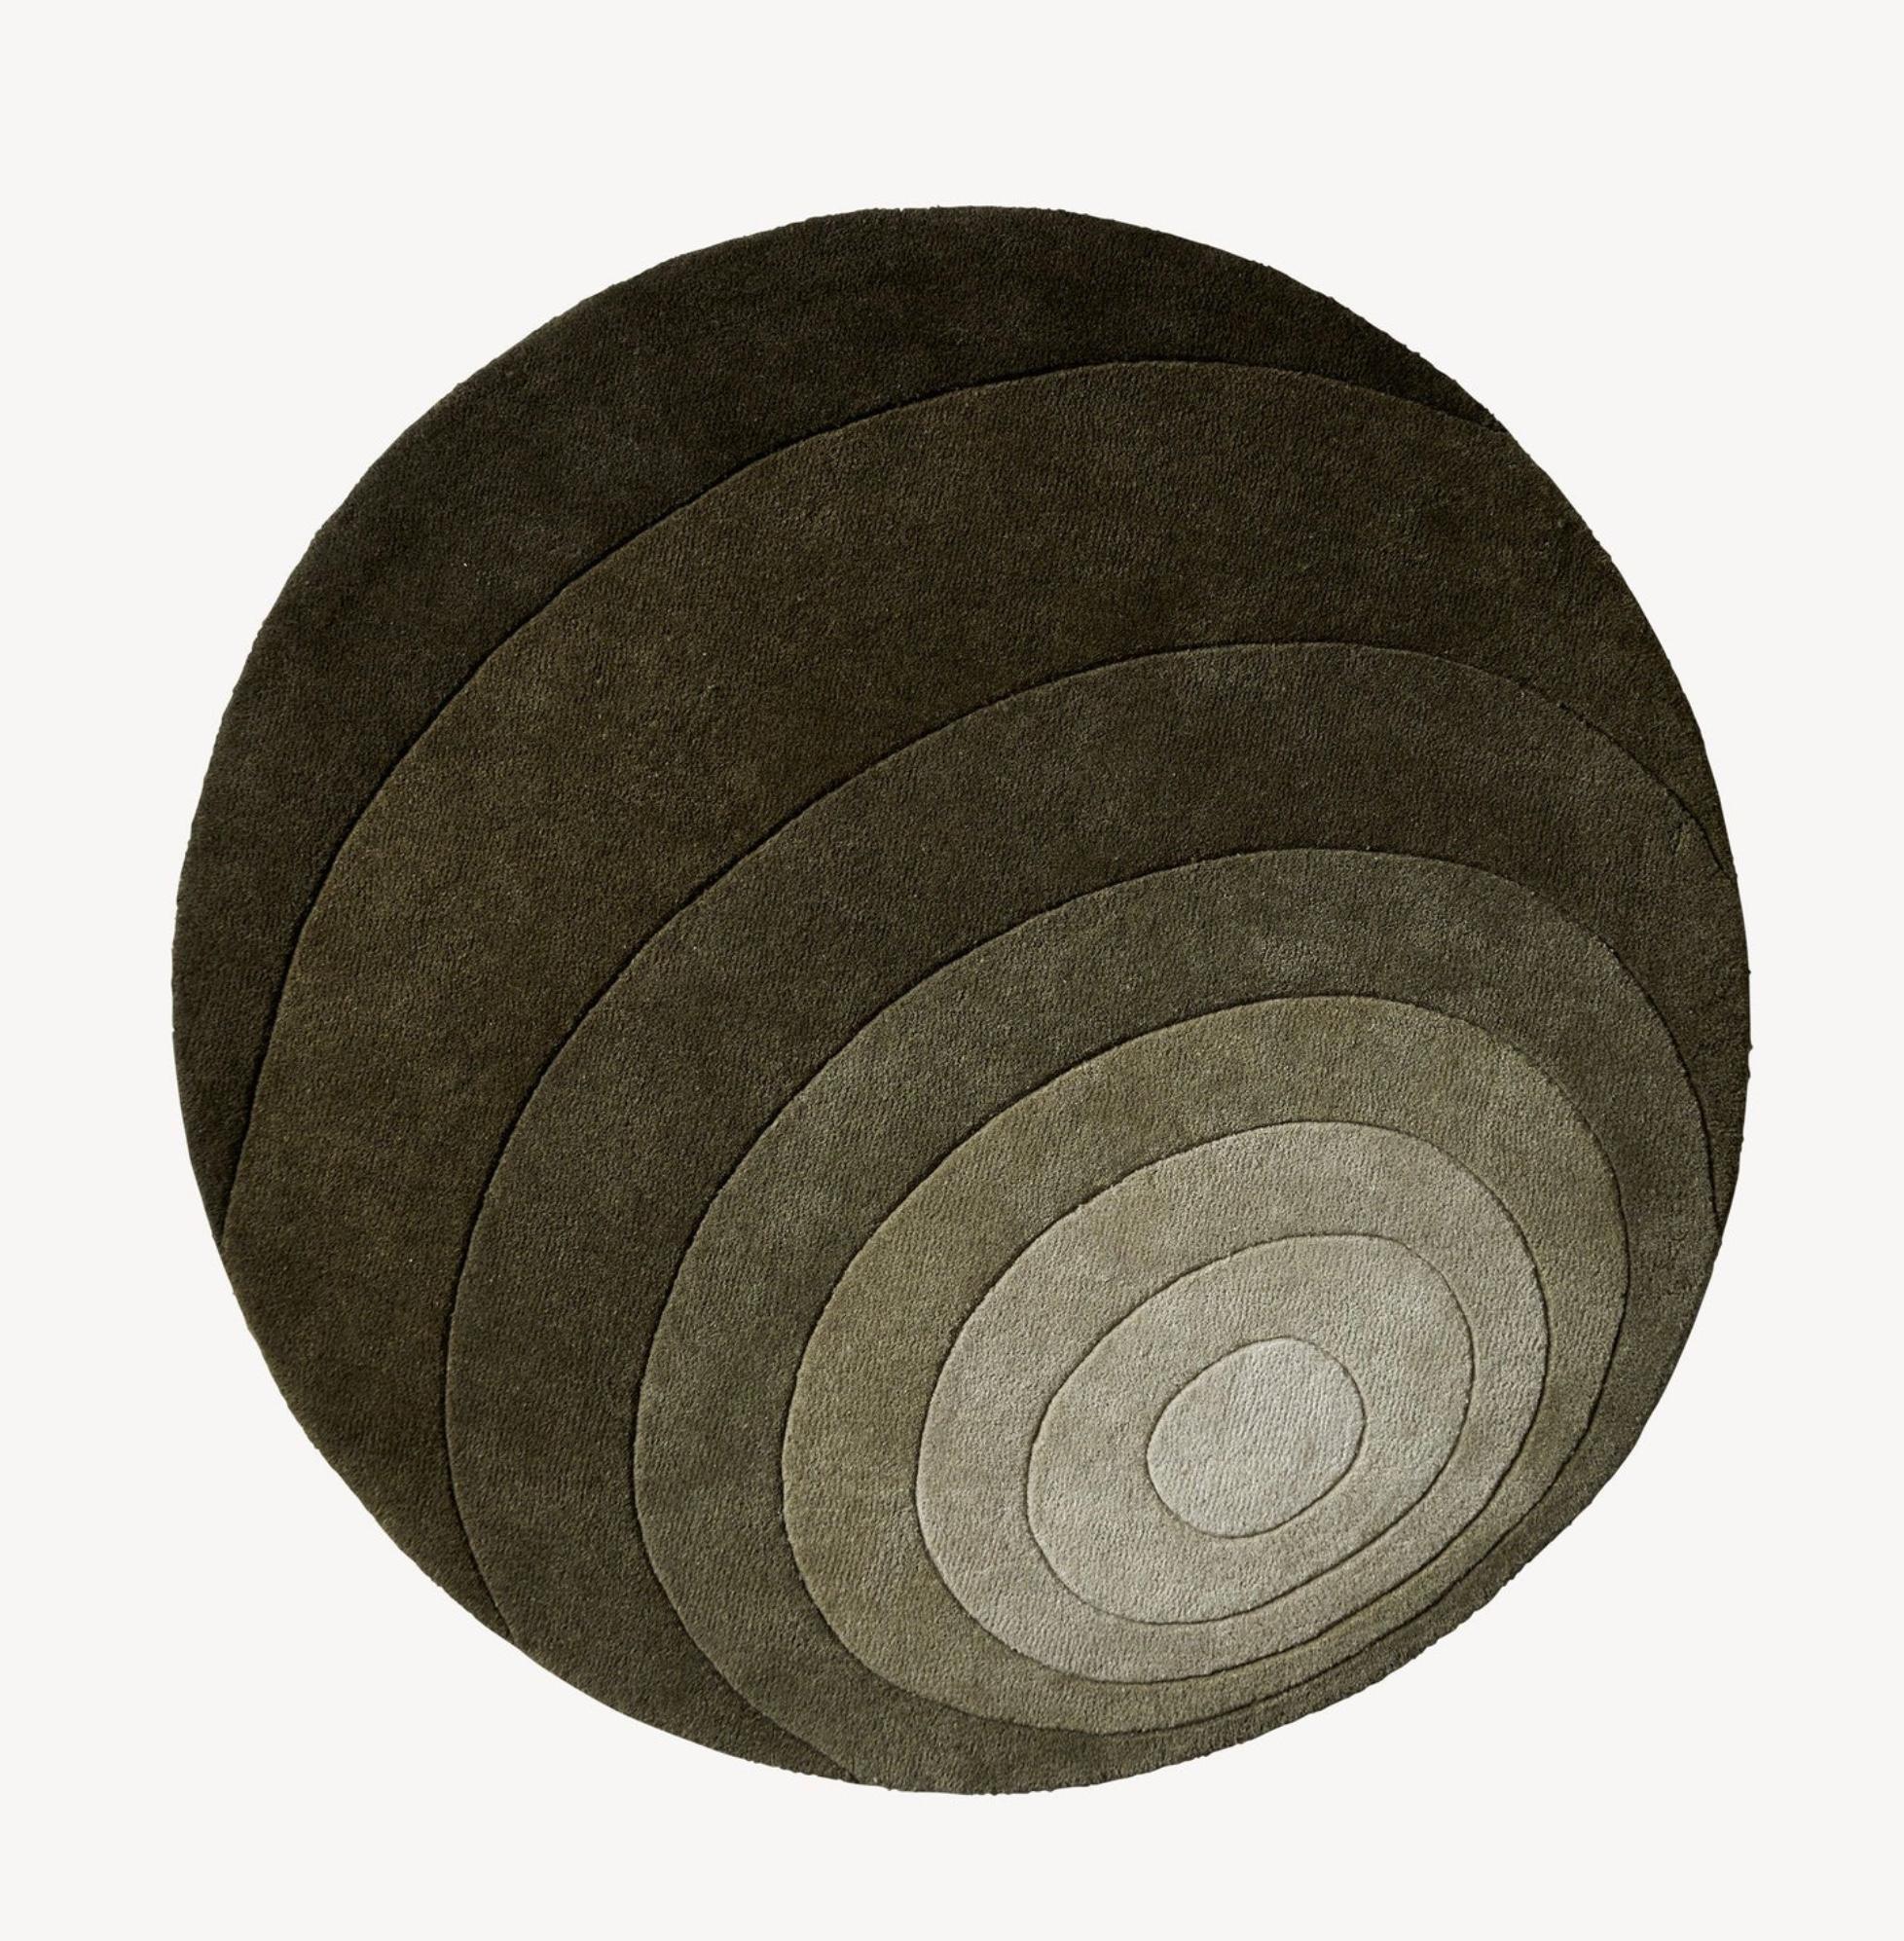 Verner Panton 'Luna' Rug 120cm by Verpan. Current production.

As well as adding a sculptural feature to a room, rugs also serve to emphasize and/or transform the dimensions of the space. All Verpan carpets are made from hand-woven 100% New Zealand